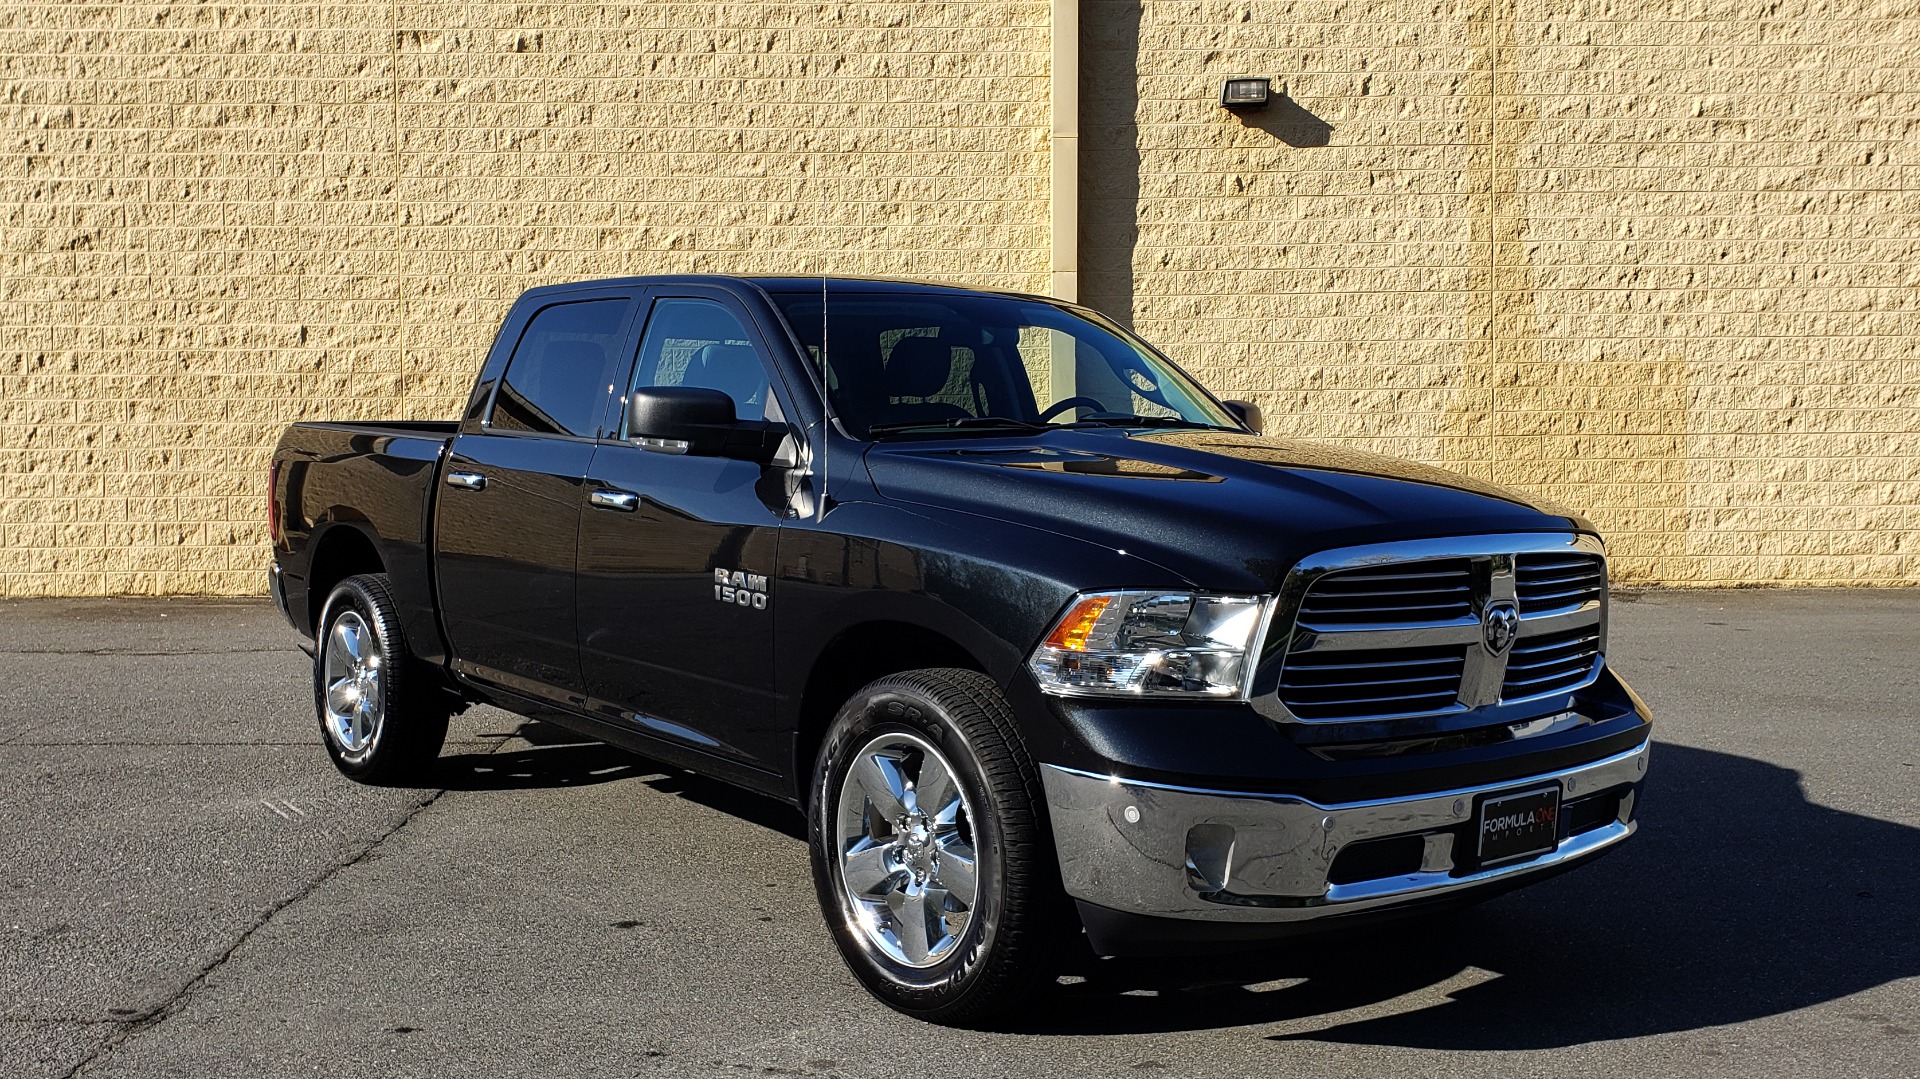 Used 2017 Ram 1500 BIG HORN CREW CAB 4X4 / 3.6L V6 / 8-SPD AUTO / WIFI HOTSPOT for sale Sold at Formula Imports in Charlotte NC 28227 4